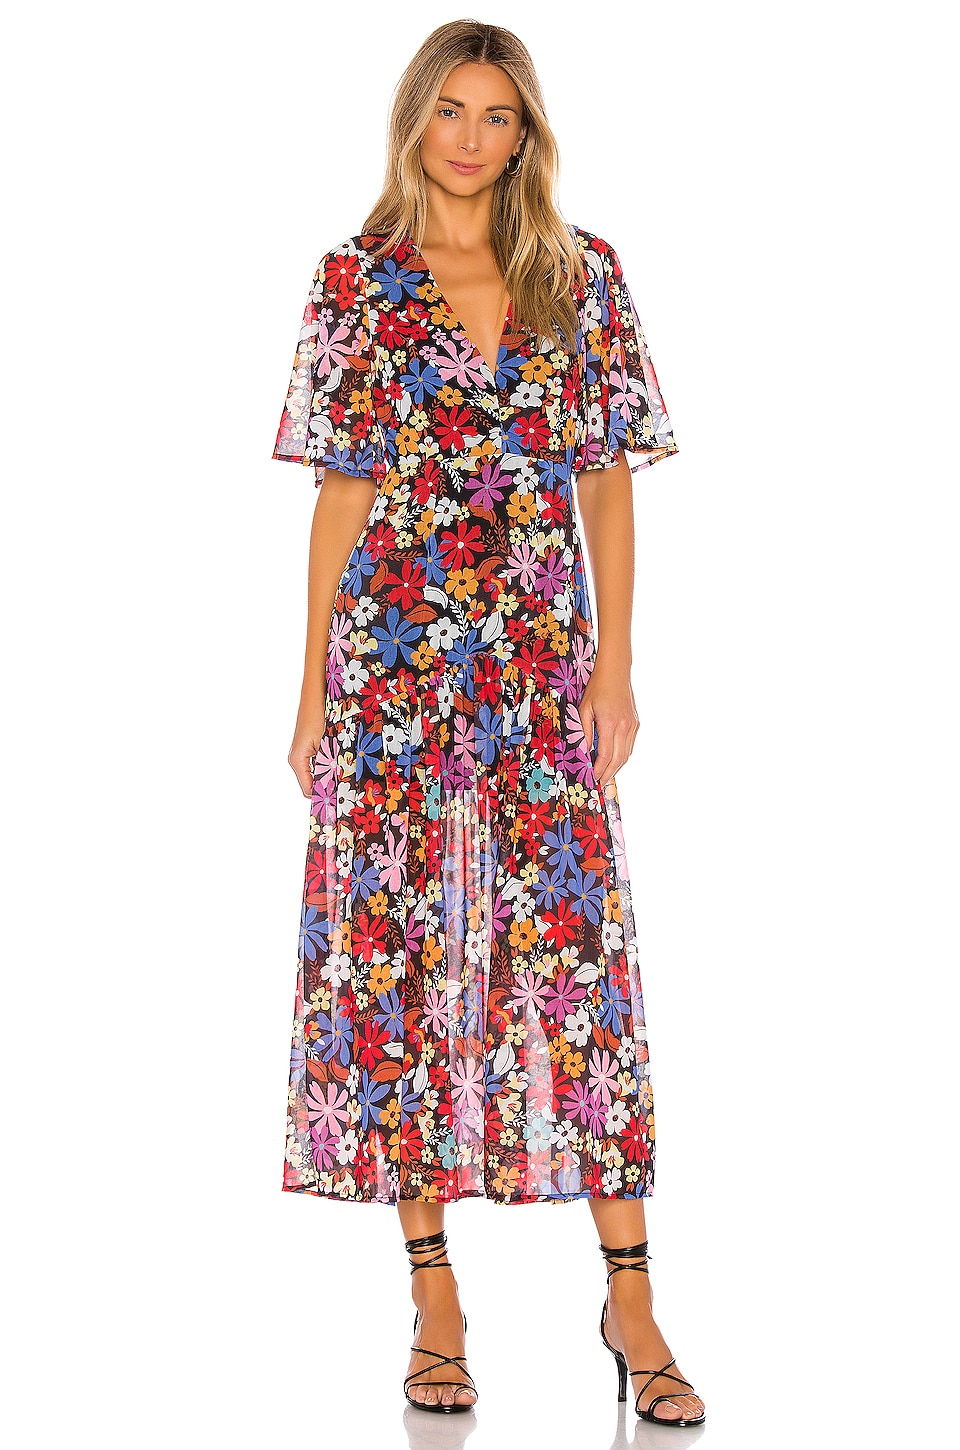 House of Harlow 1960 Louise Dress in Floral Multi | REVOLVE